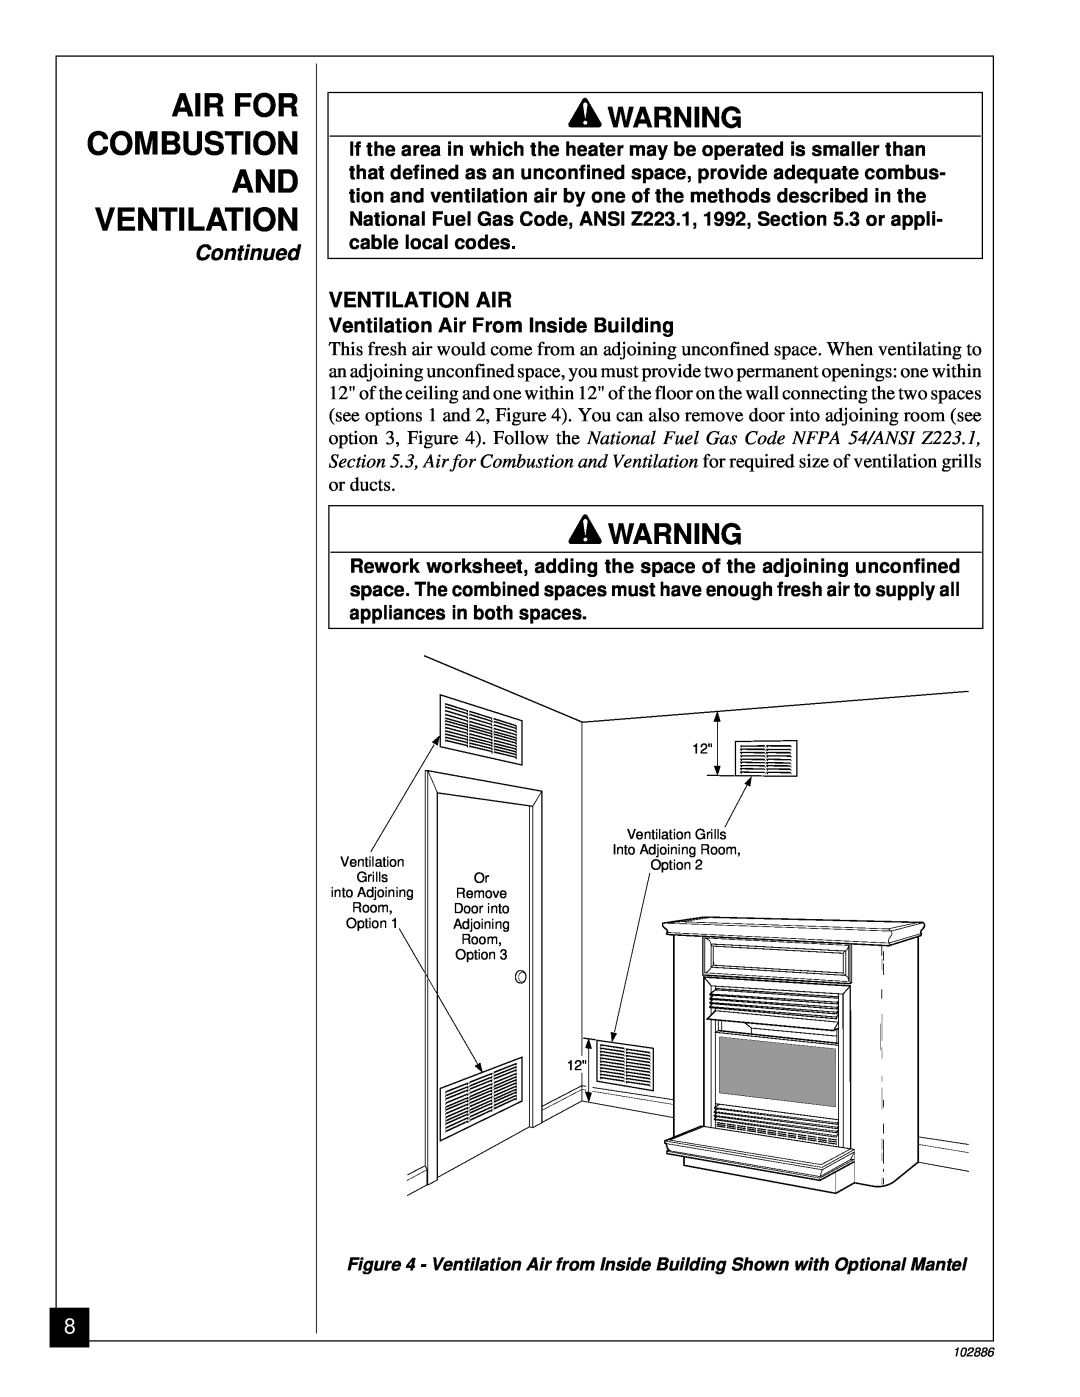 Vanguard Heating VMH26TPB installation manual Air For Combustion And Ventilation, Continued, Ventilation Air 